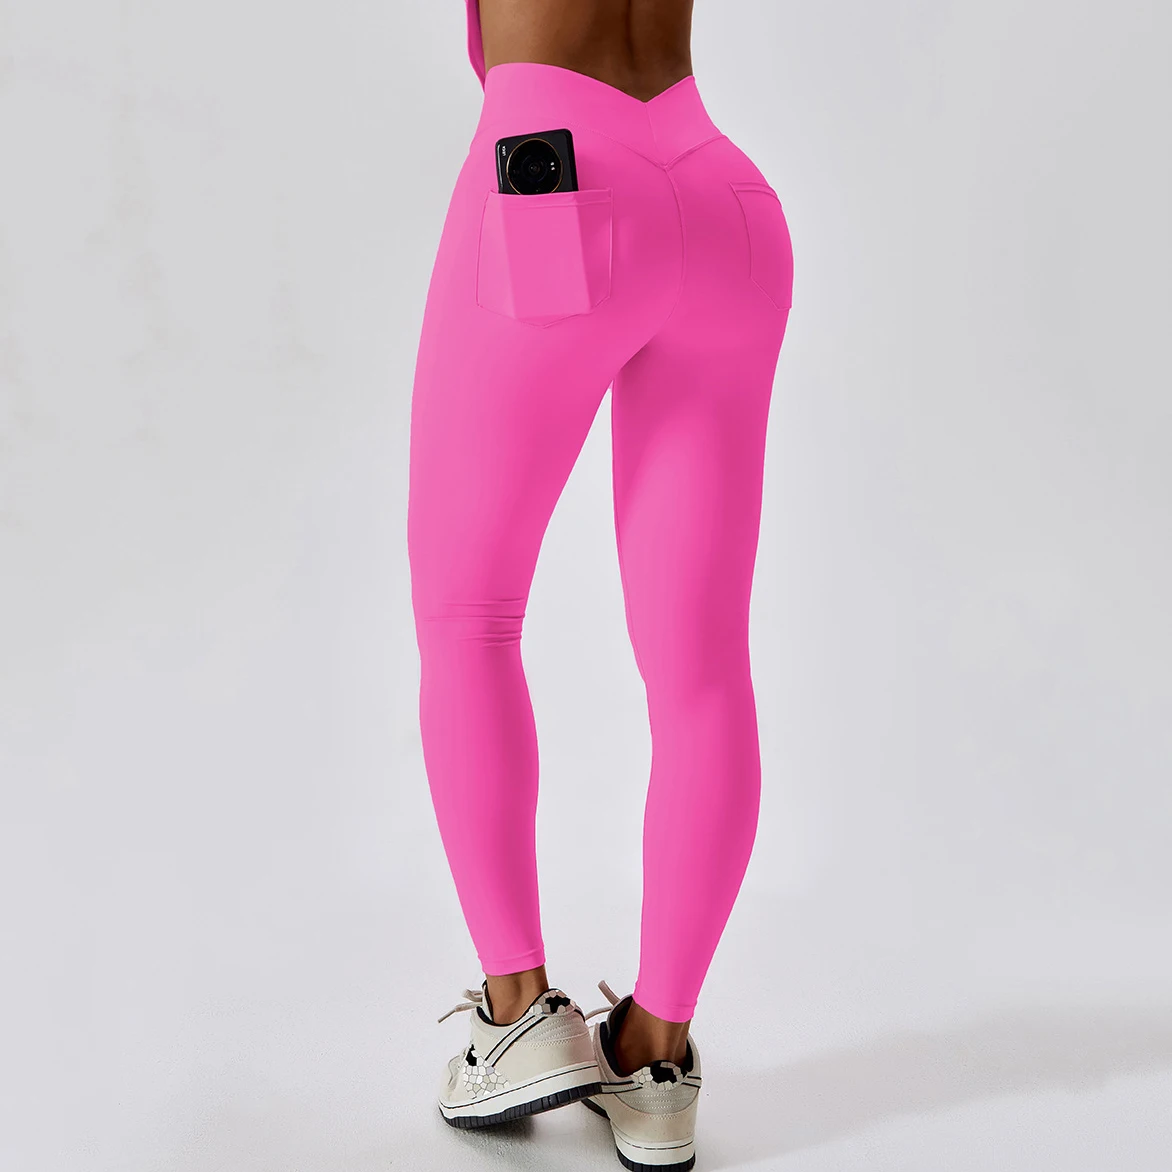 Quick Dry Womens Yoga Leggings And Pink Exercise Pants Set 5